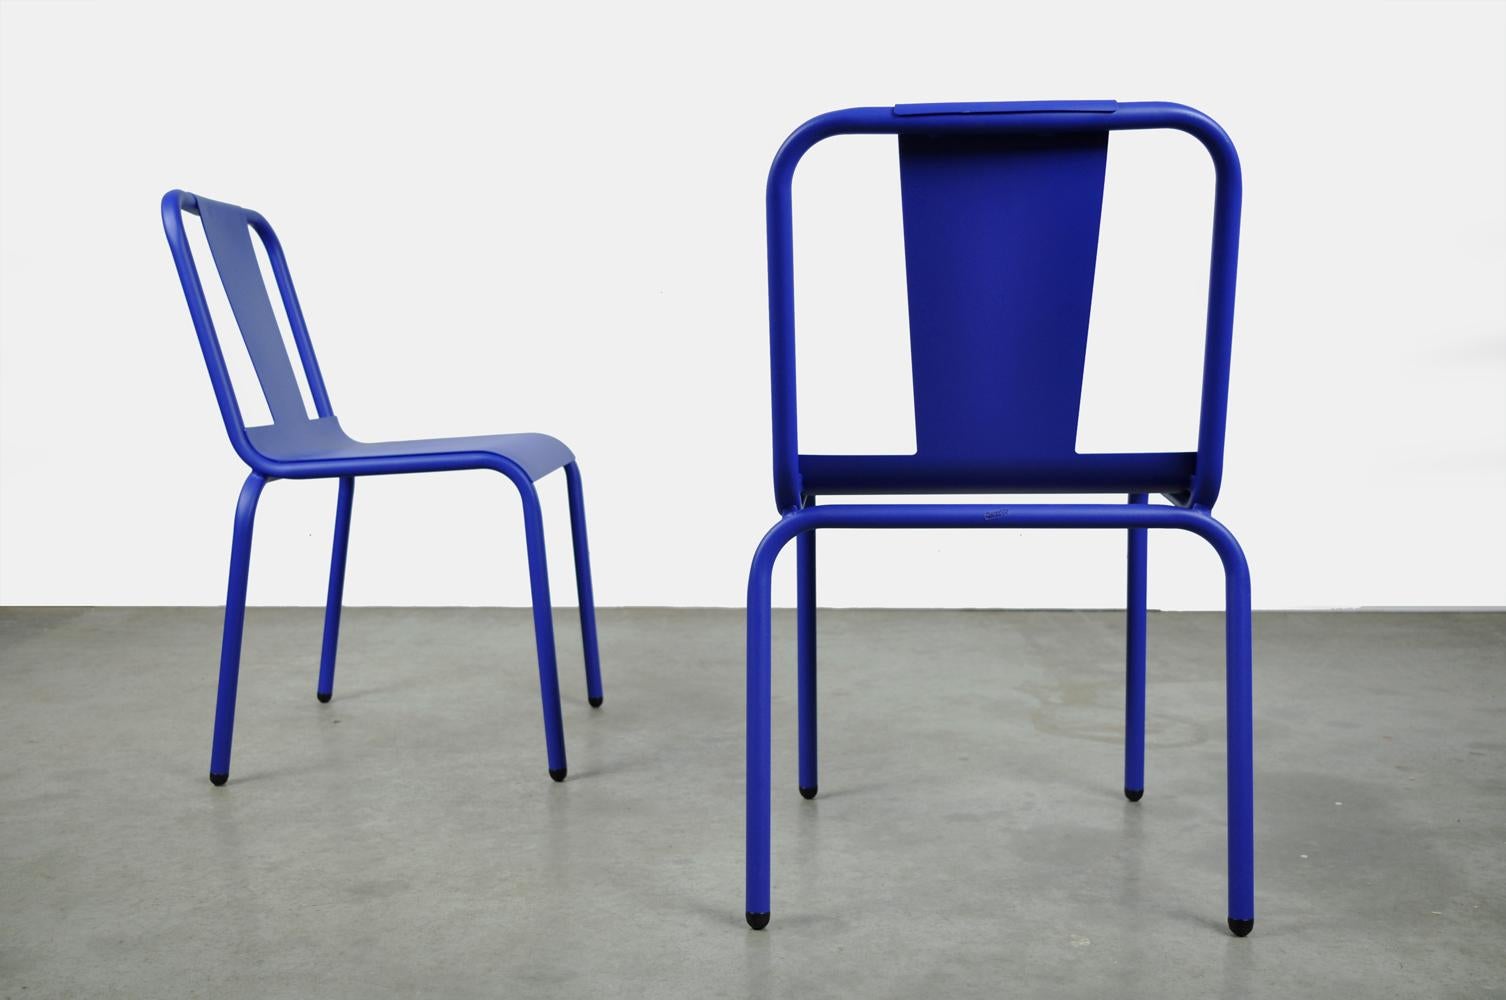 Set of 6 Design Chairs by Isi Design Group, Produced by Isimar, 2000 Spain 3